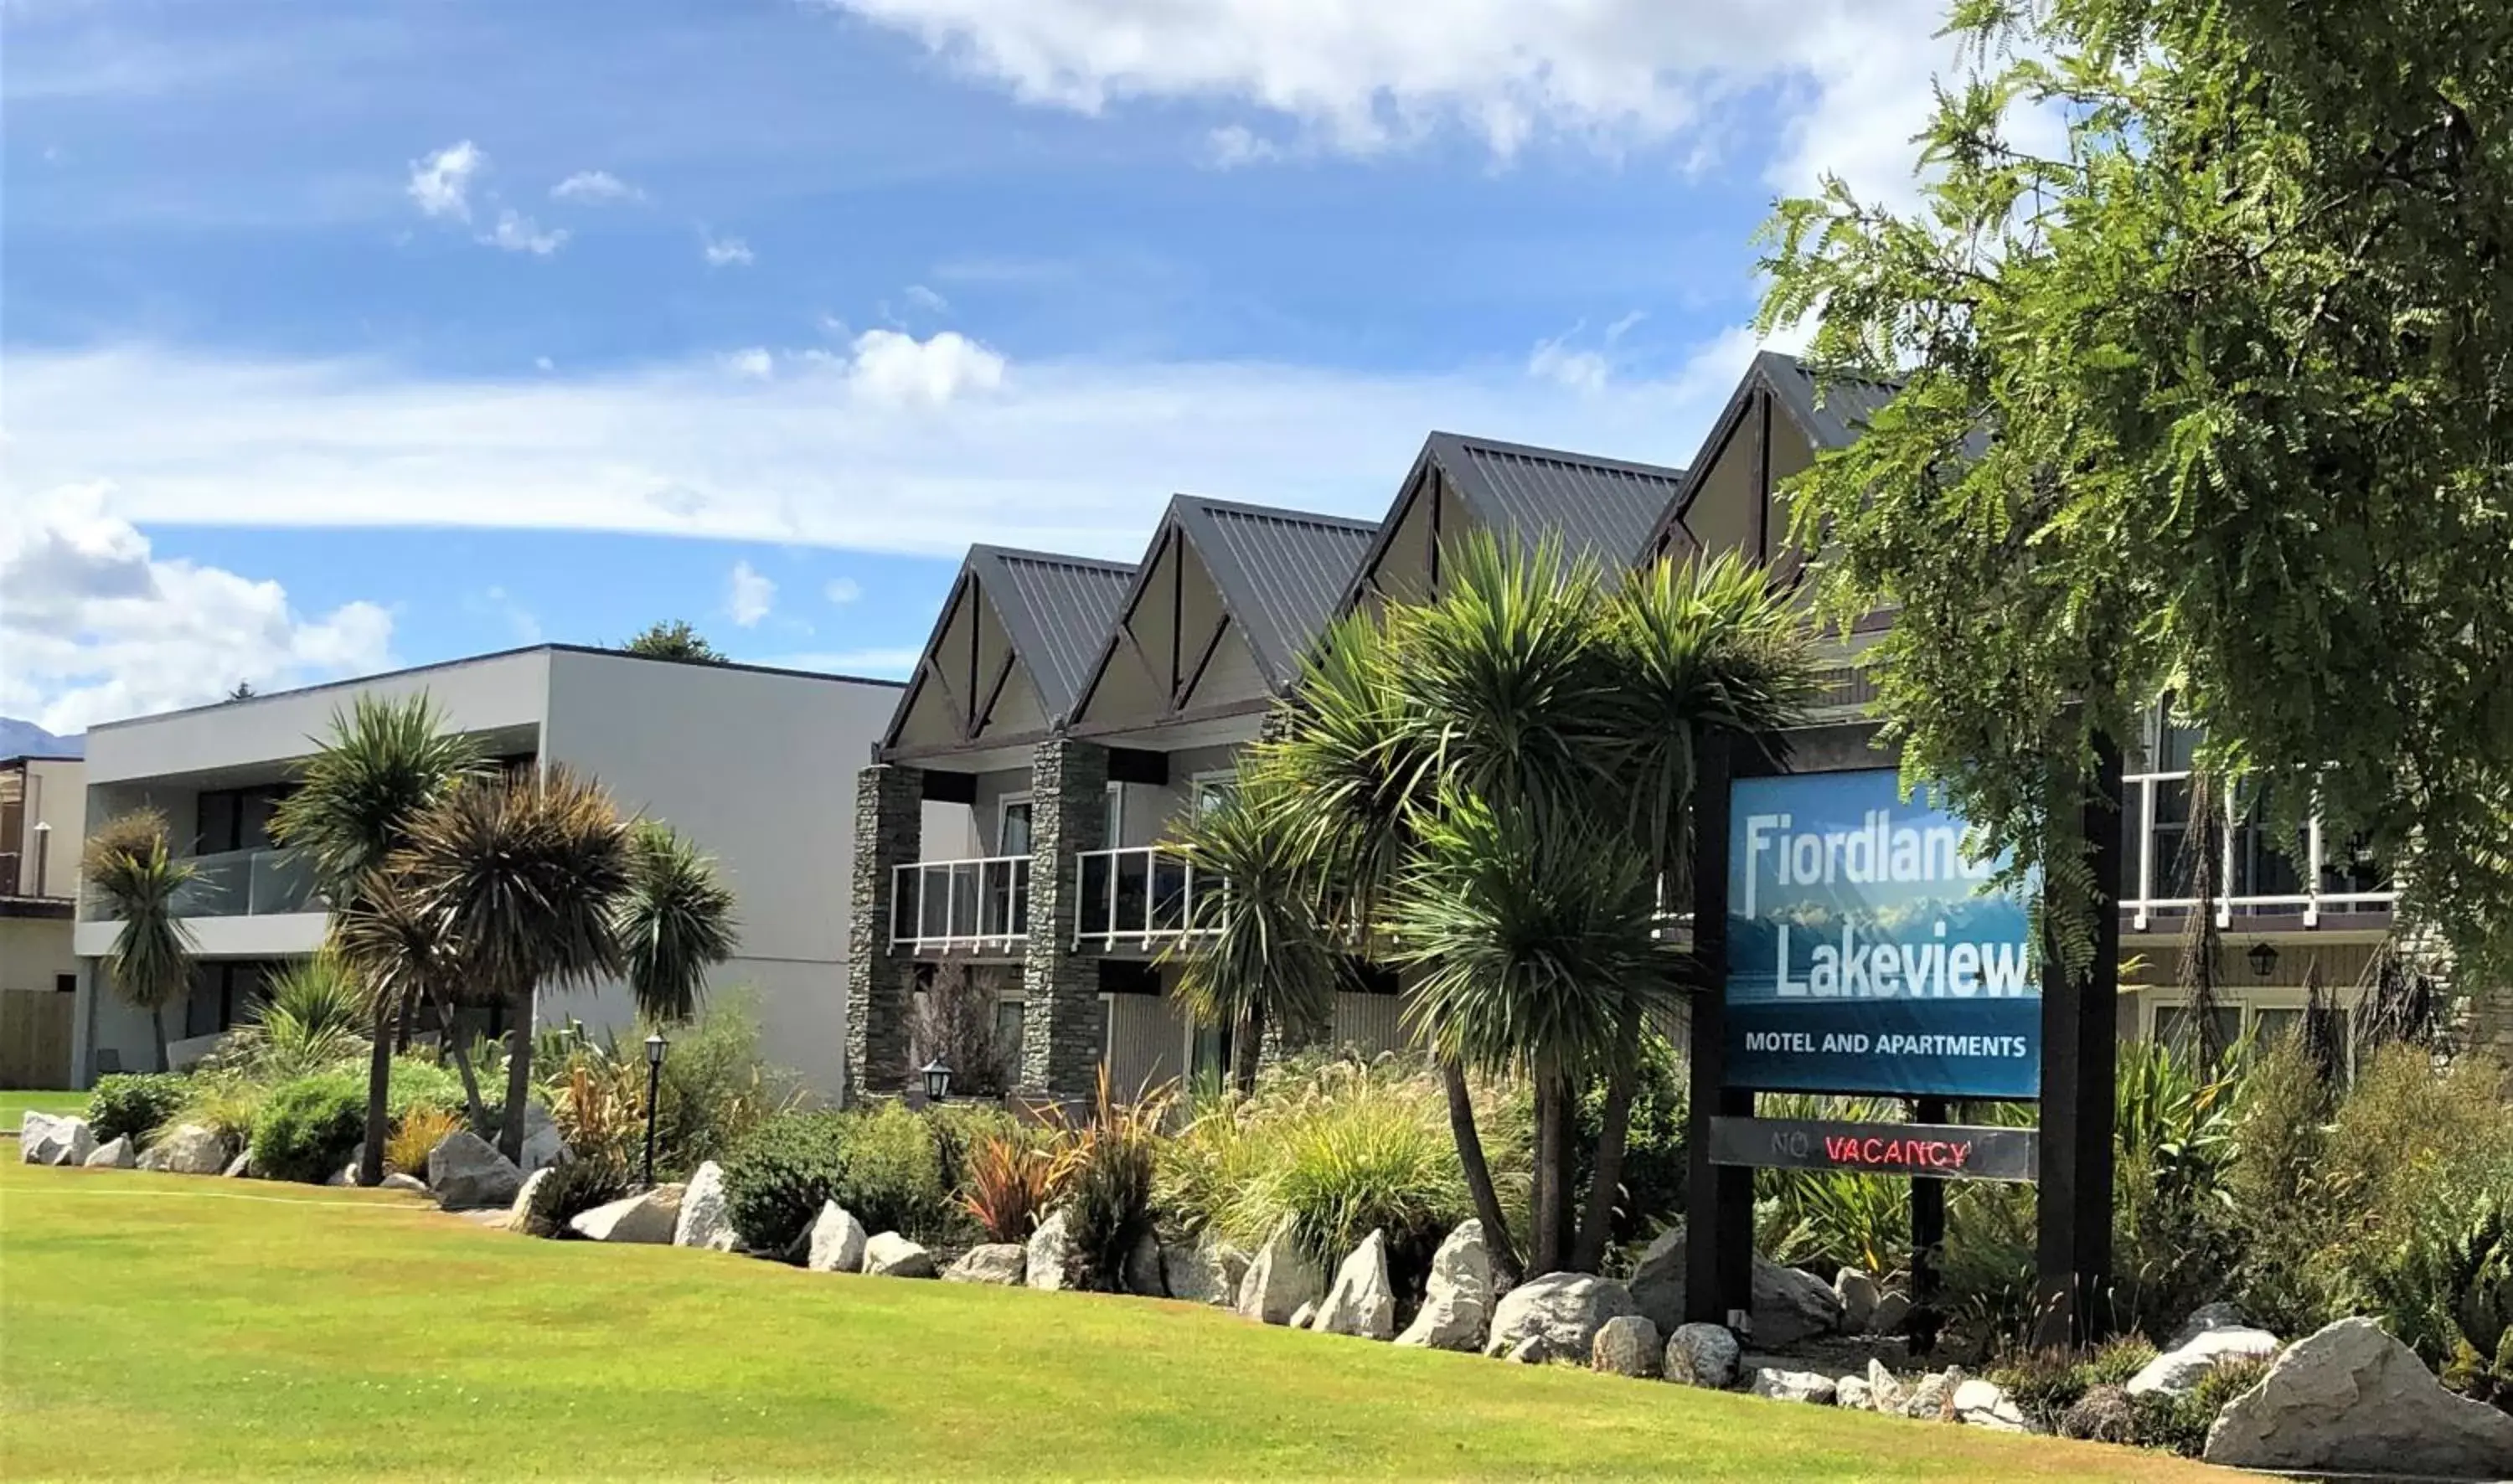 Property Building in Fiordland Lakeview Motel and Apartments